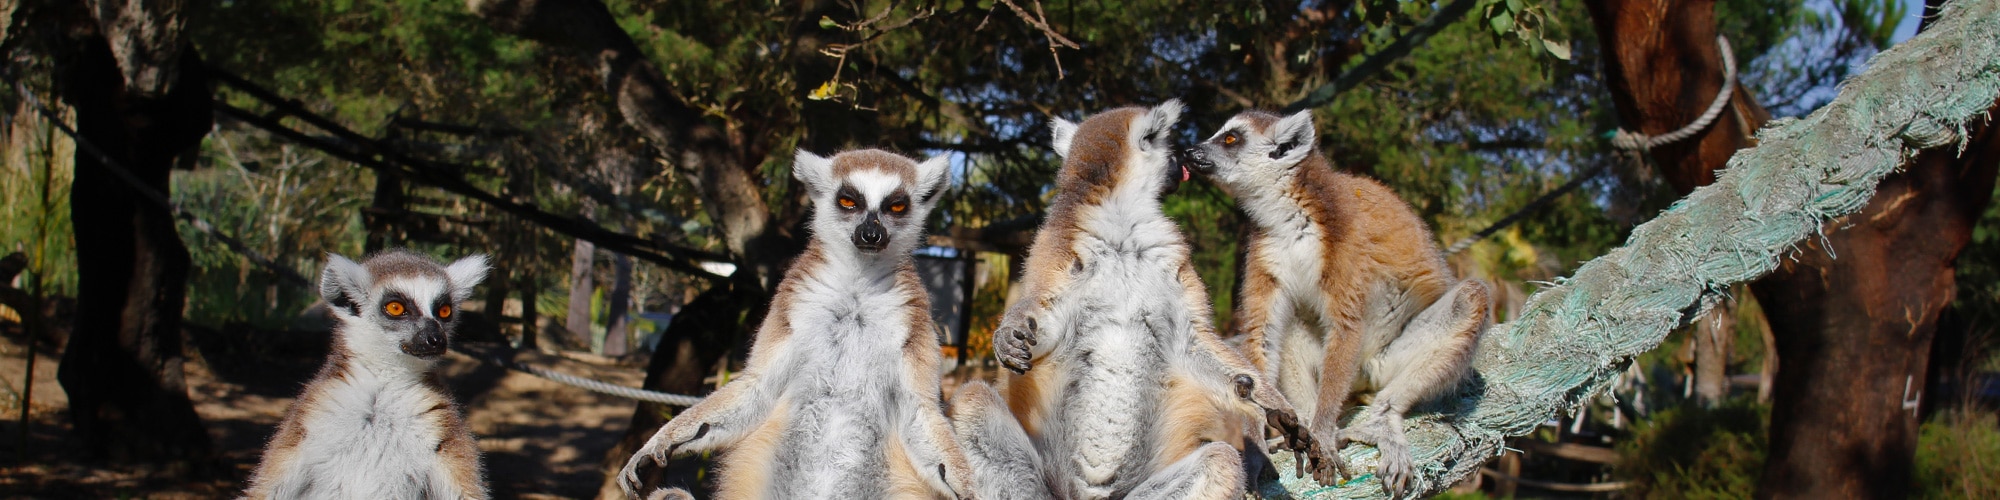 A yawning Lemur | The Ring-tailed Lemur is highly social, li… | Flickr